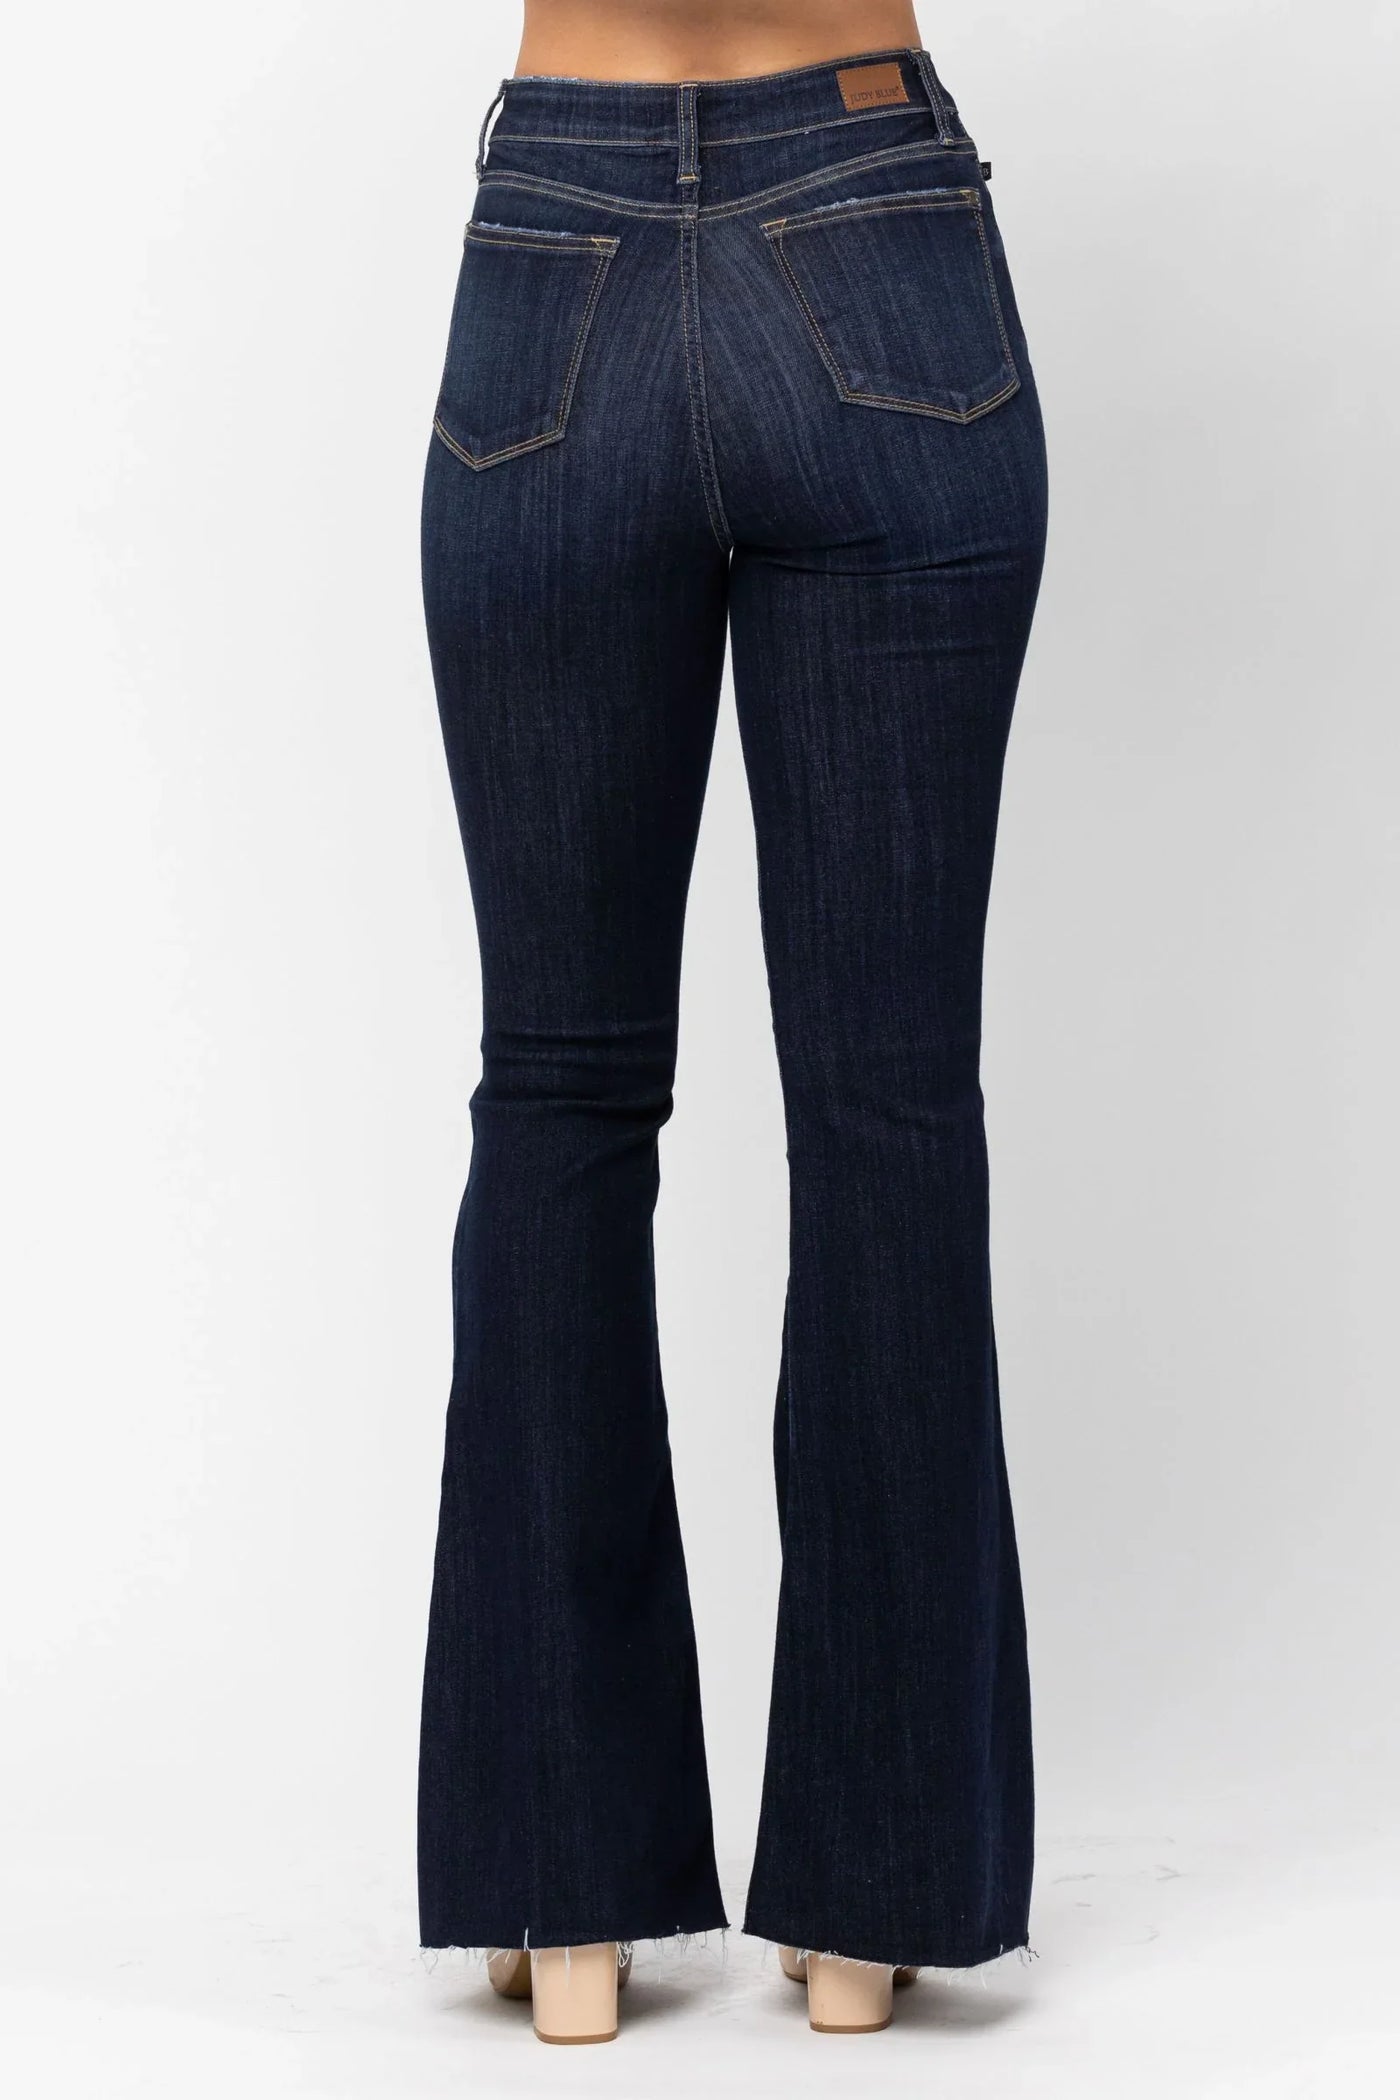 Judy Blue Curie Classic Flare Jeans- plus